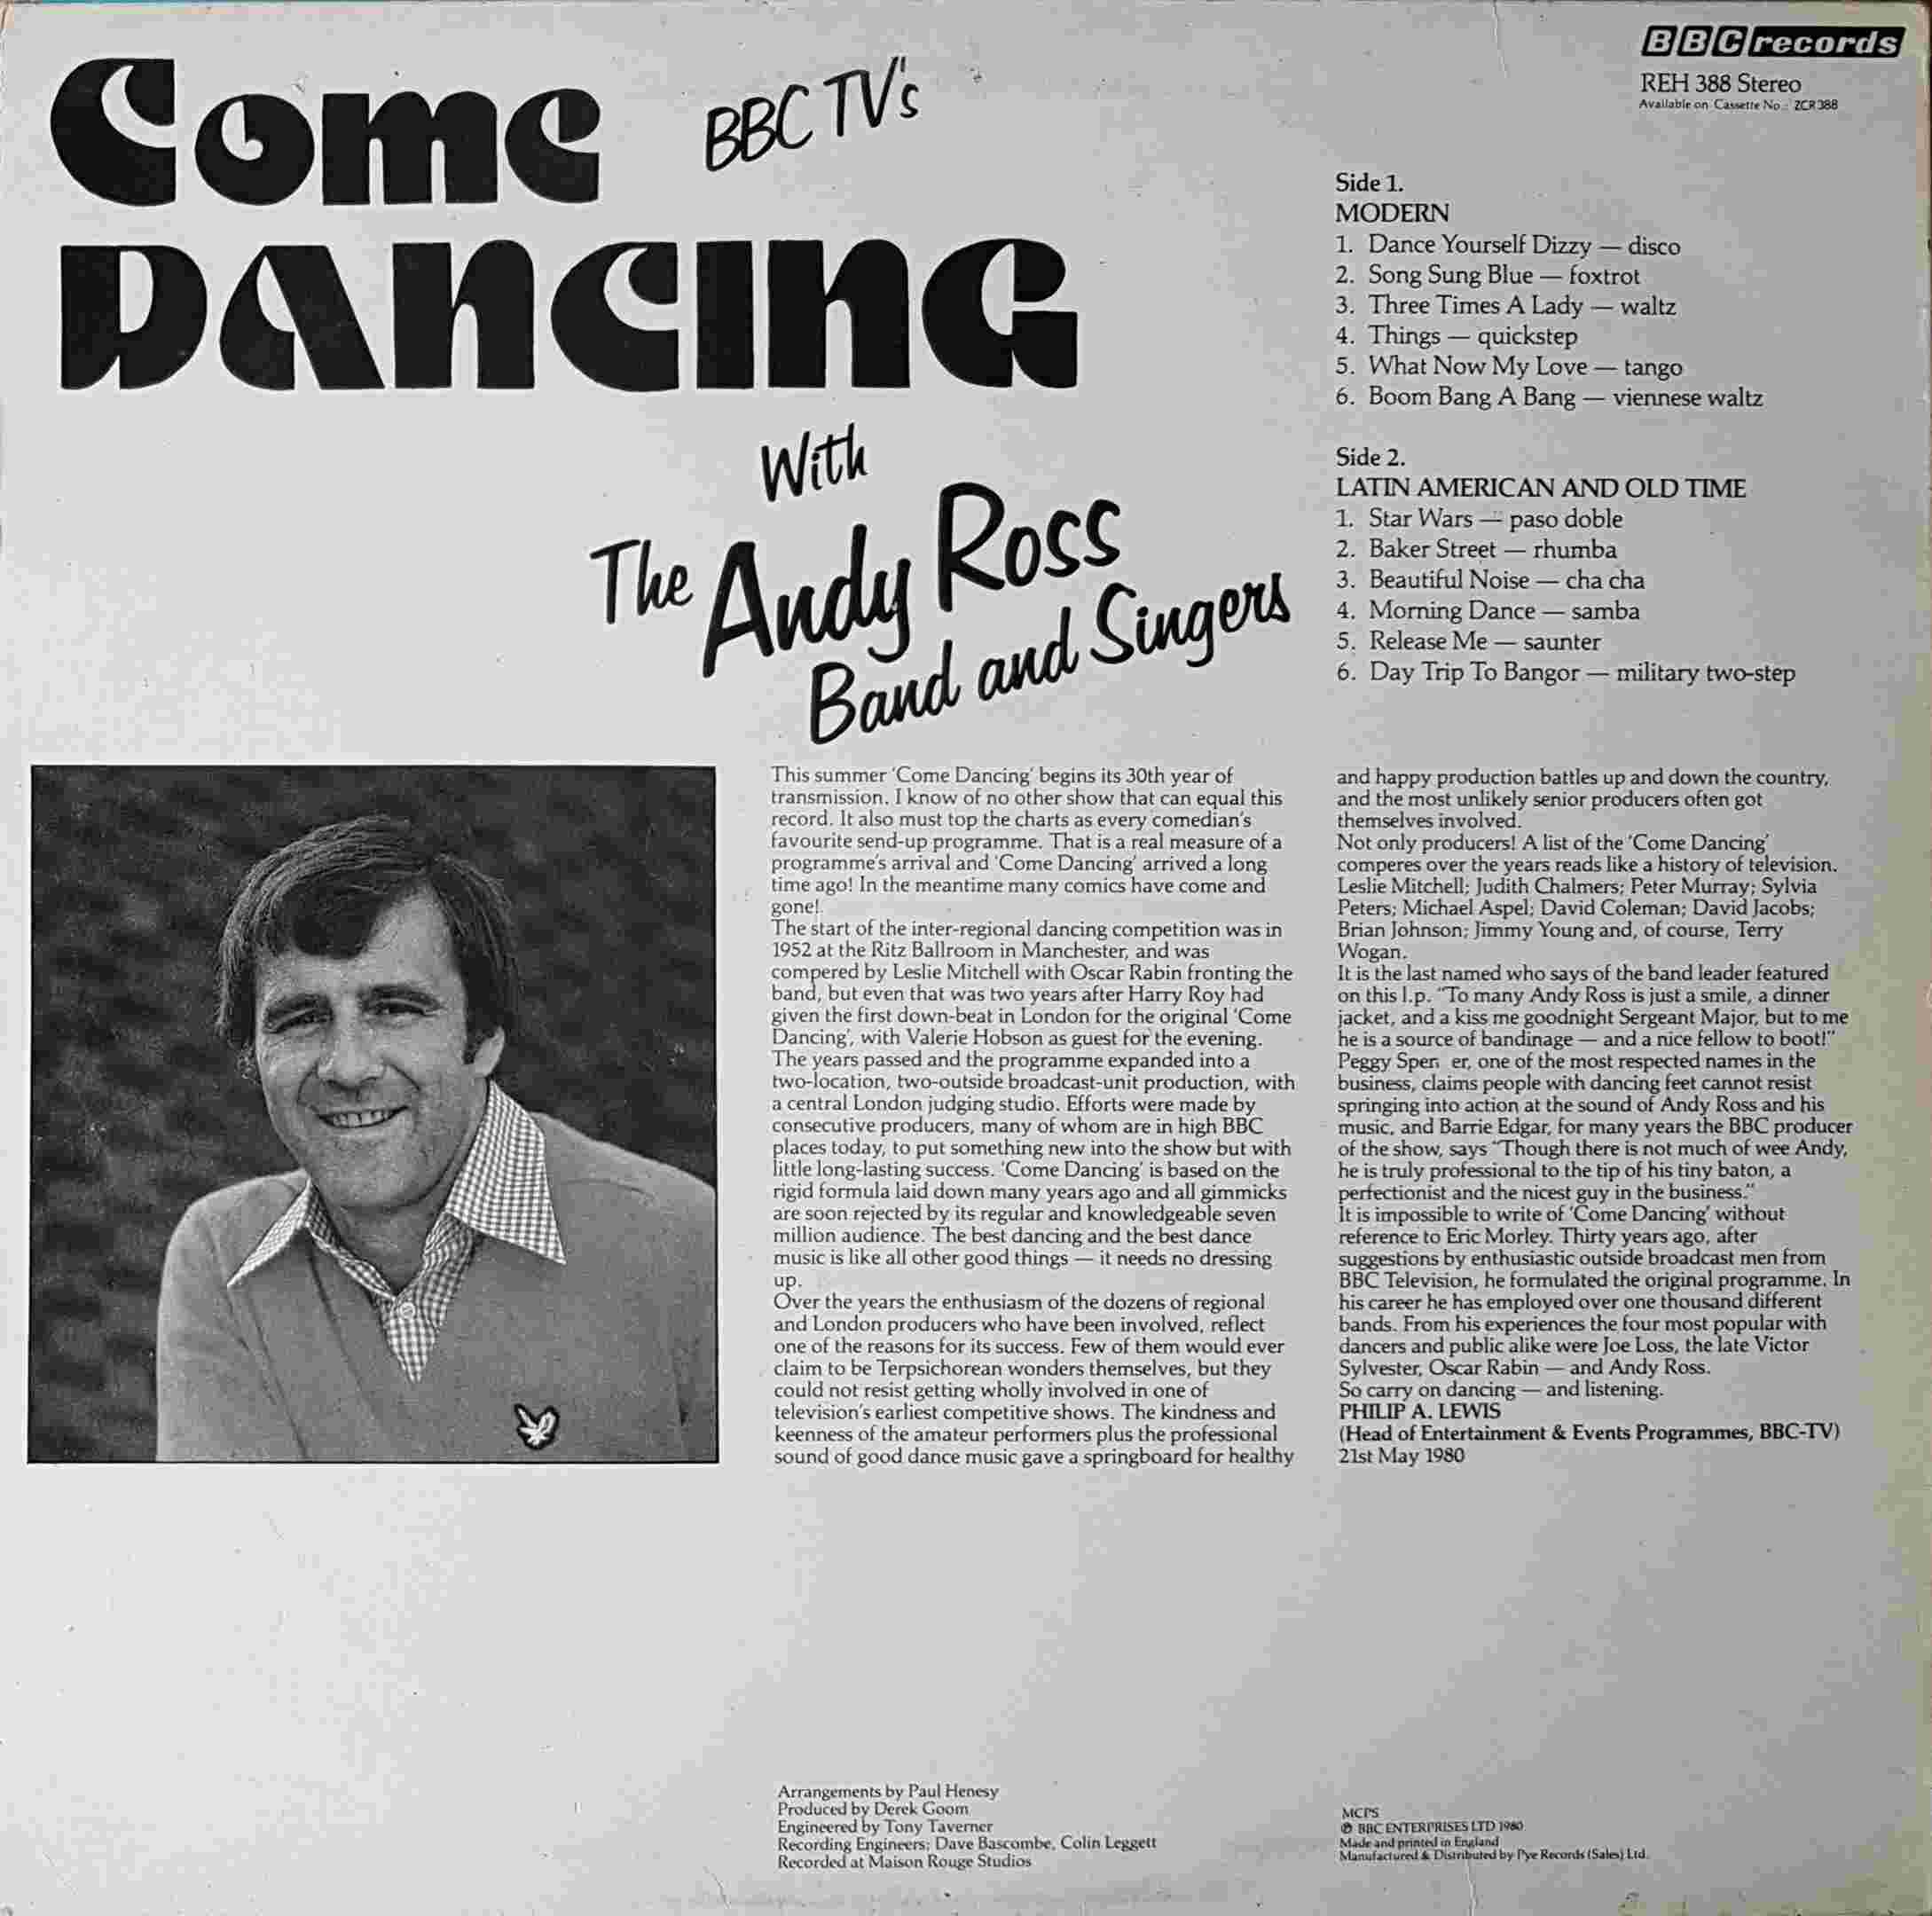 Picture of REH 388 Come dancing by artist Various from the BBC records and Tapes library